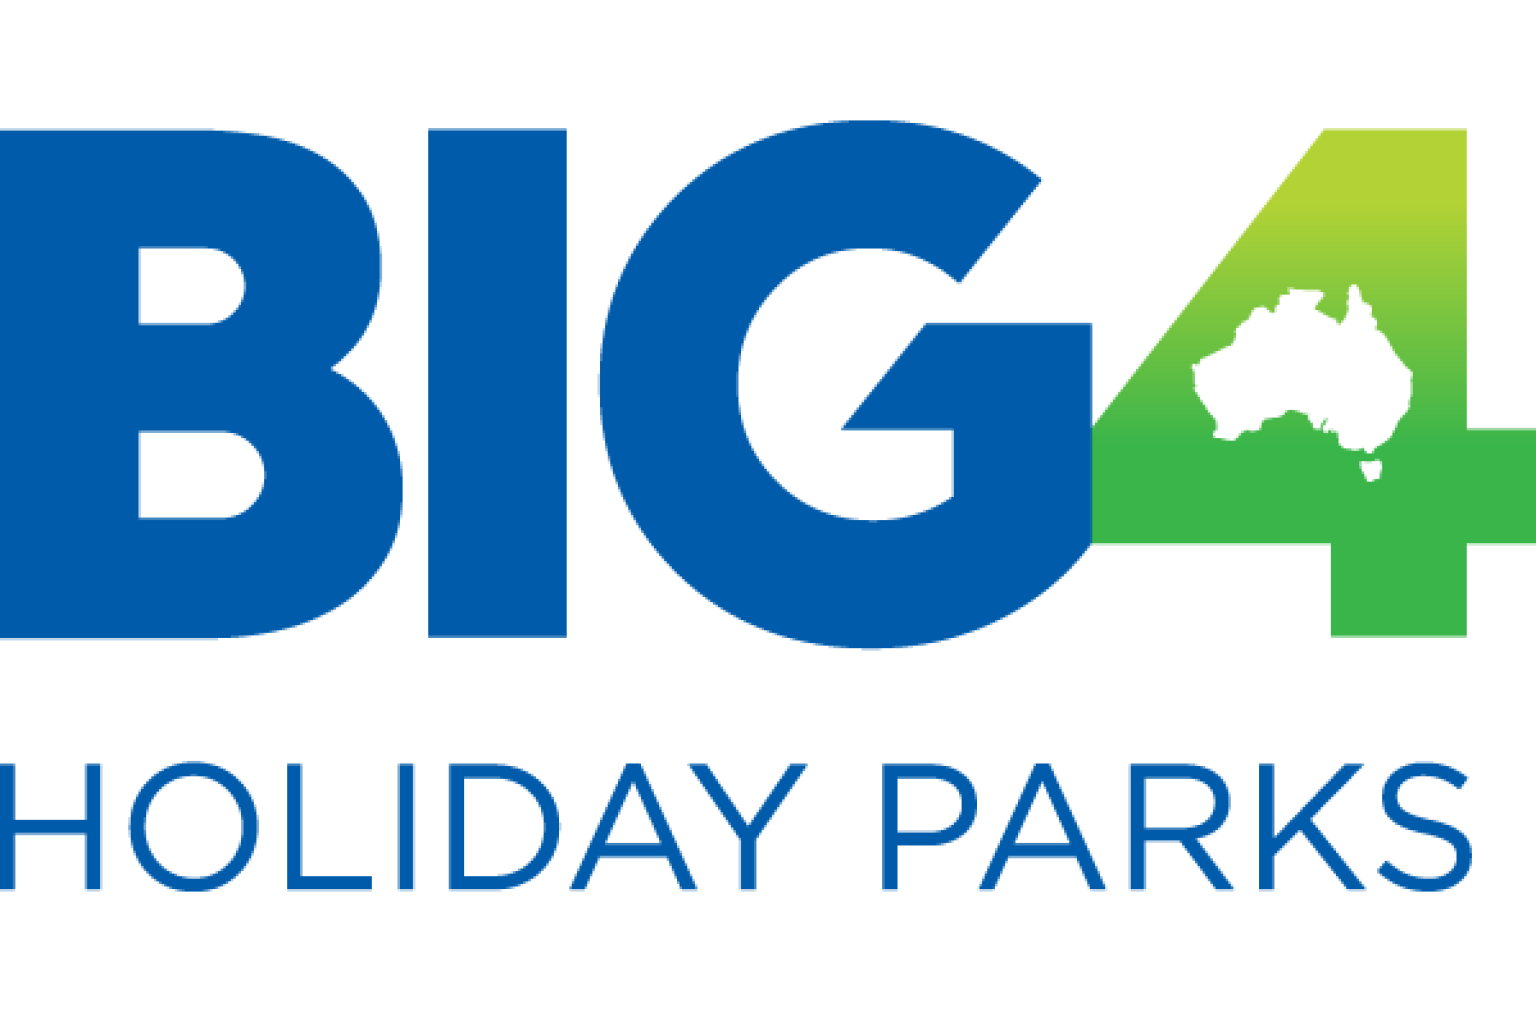 BIG4 Holiday Parks Unveils ‘GO BIG’ Campaign Encouraging Aussie Travellers to Book Now